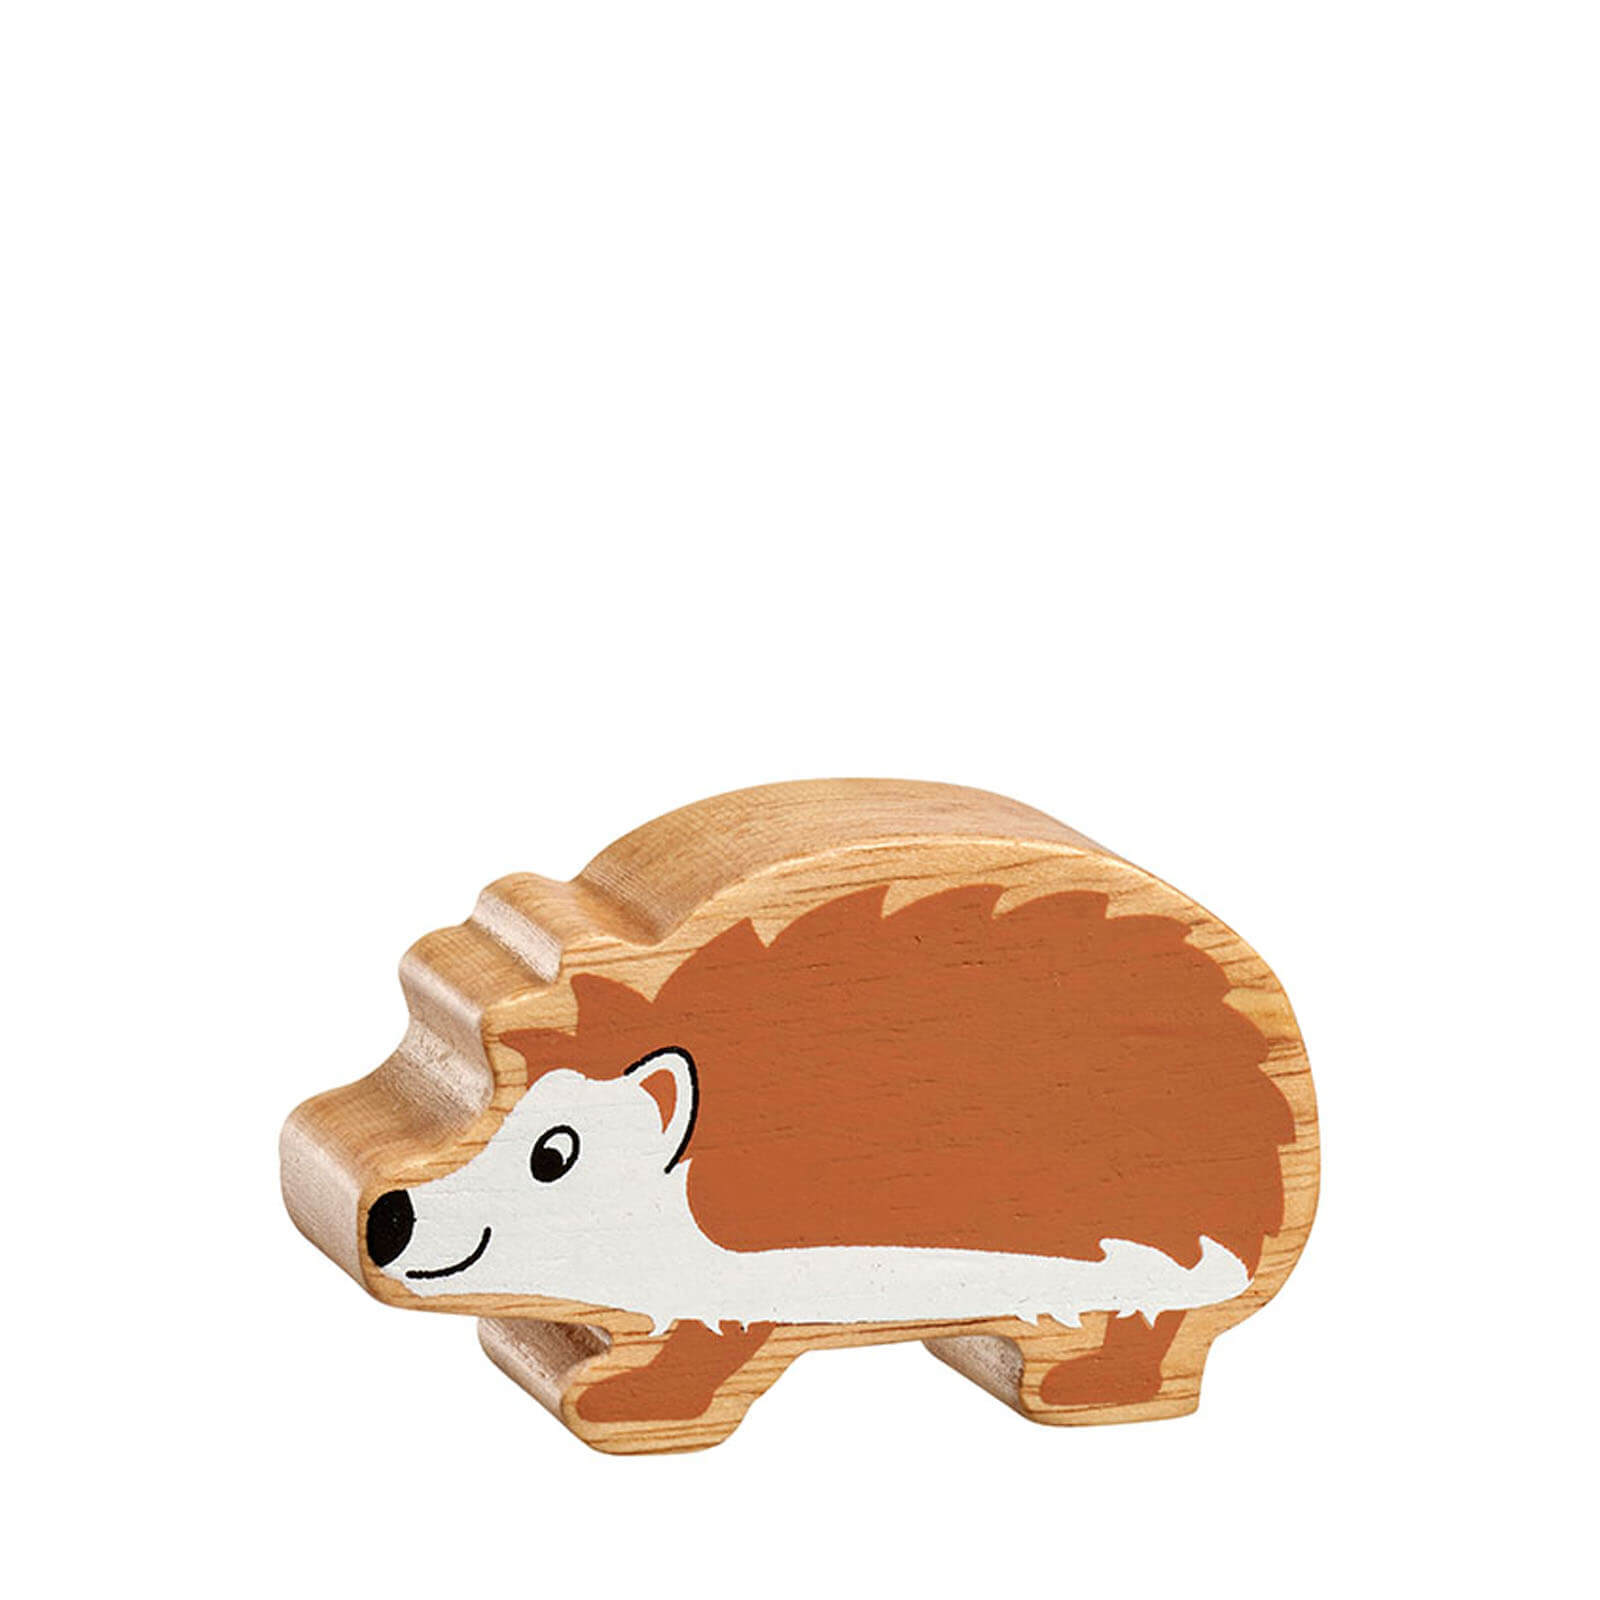 Natural Painted Wood - Brown and White Hedgehog Figure